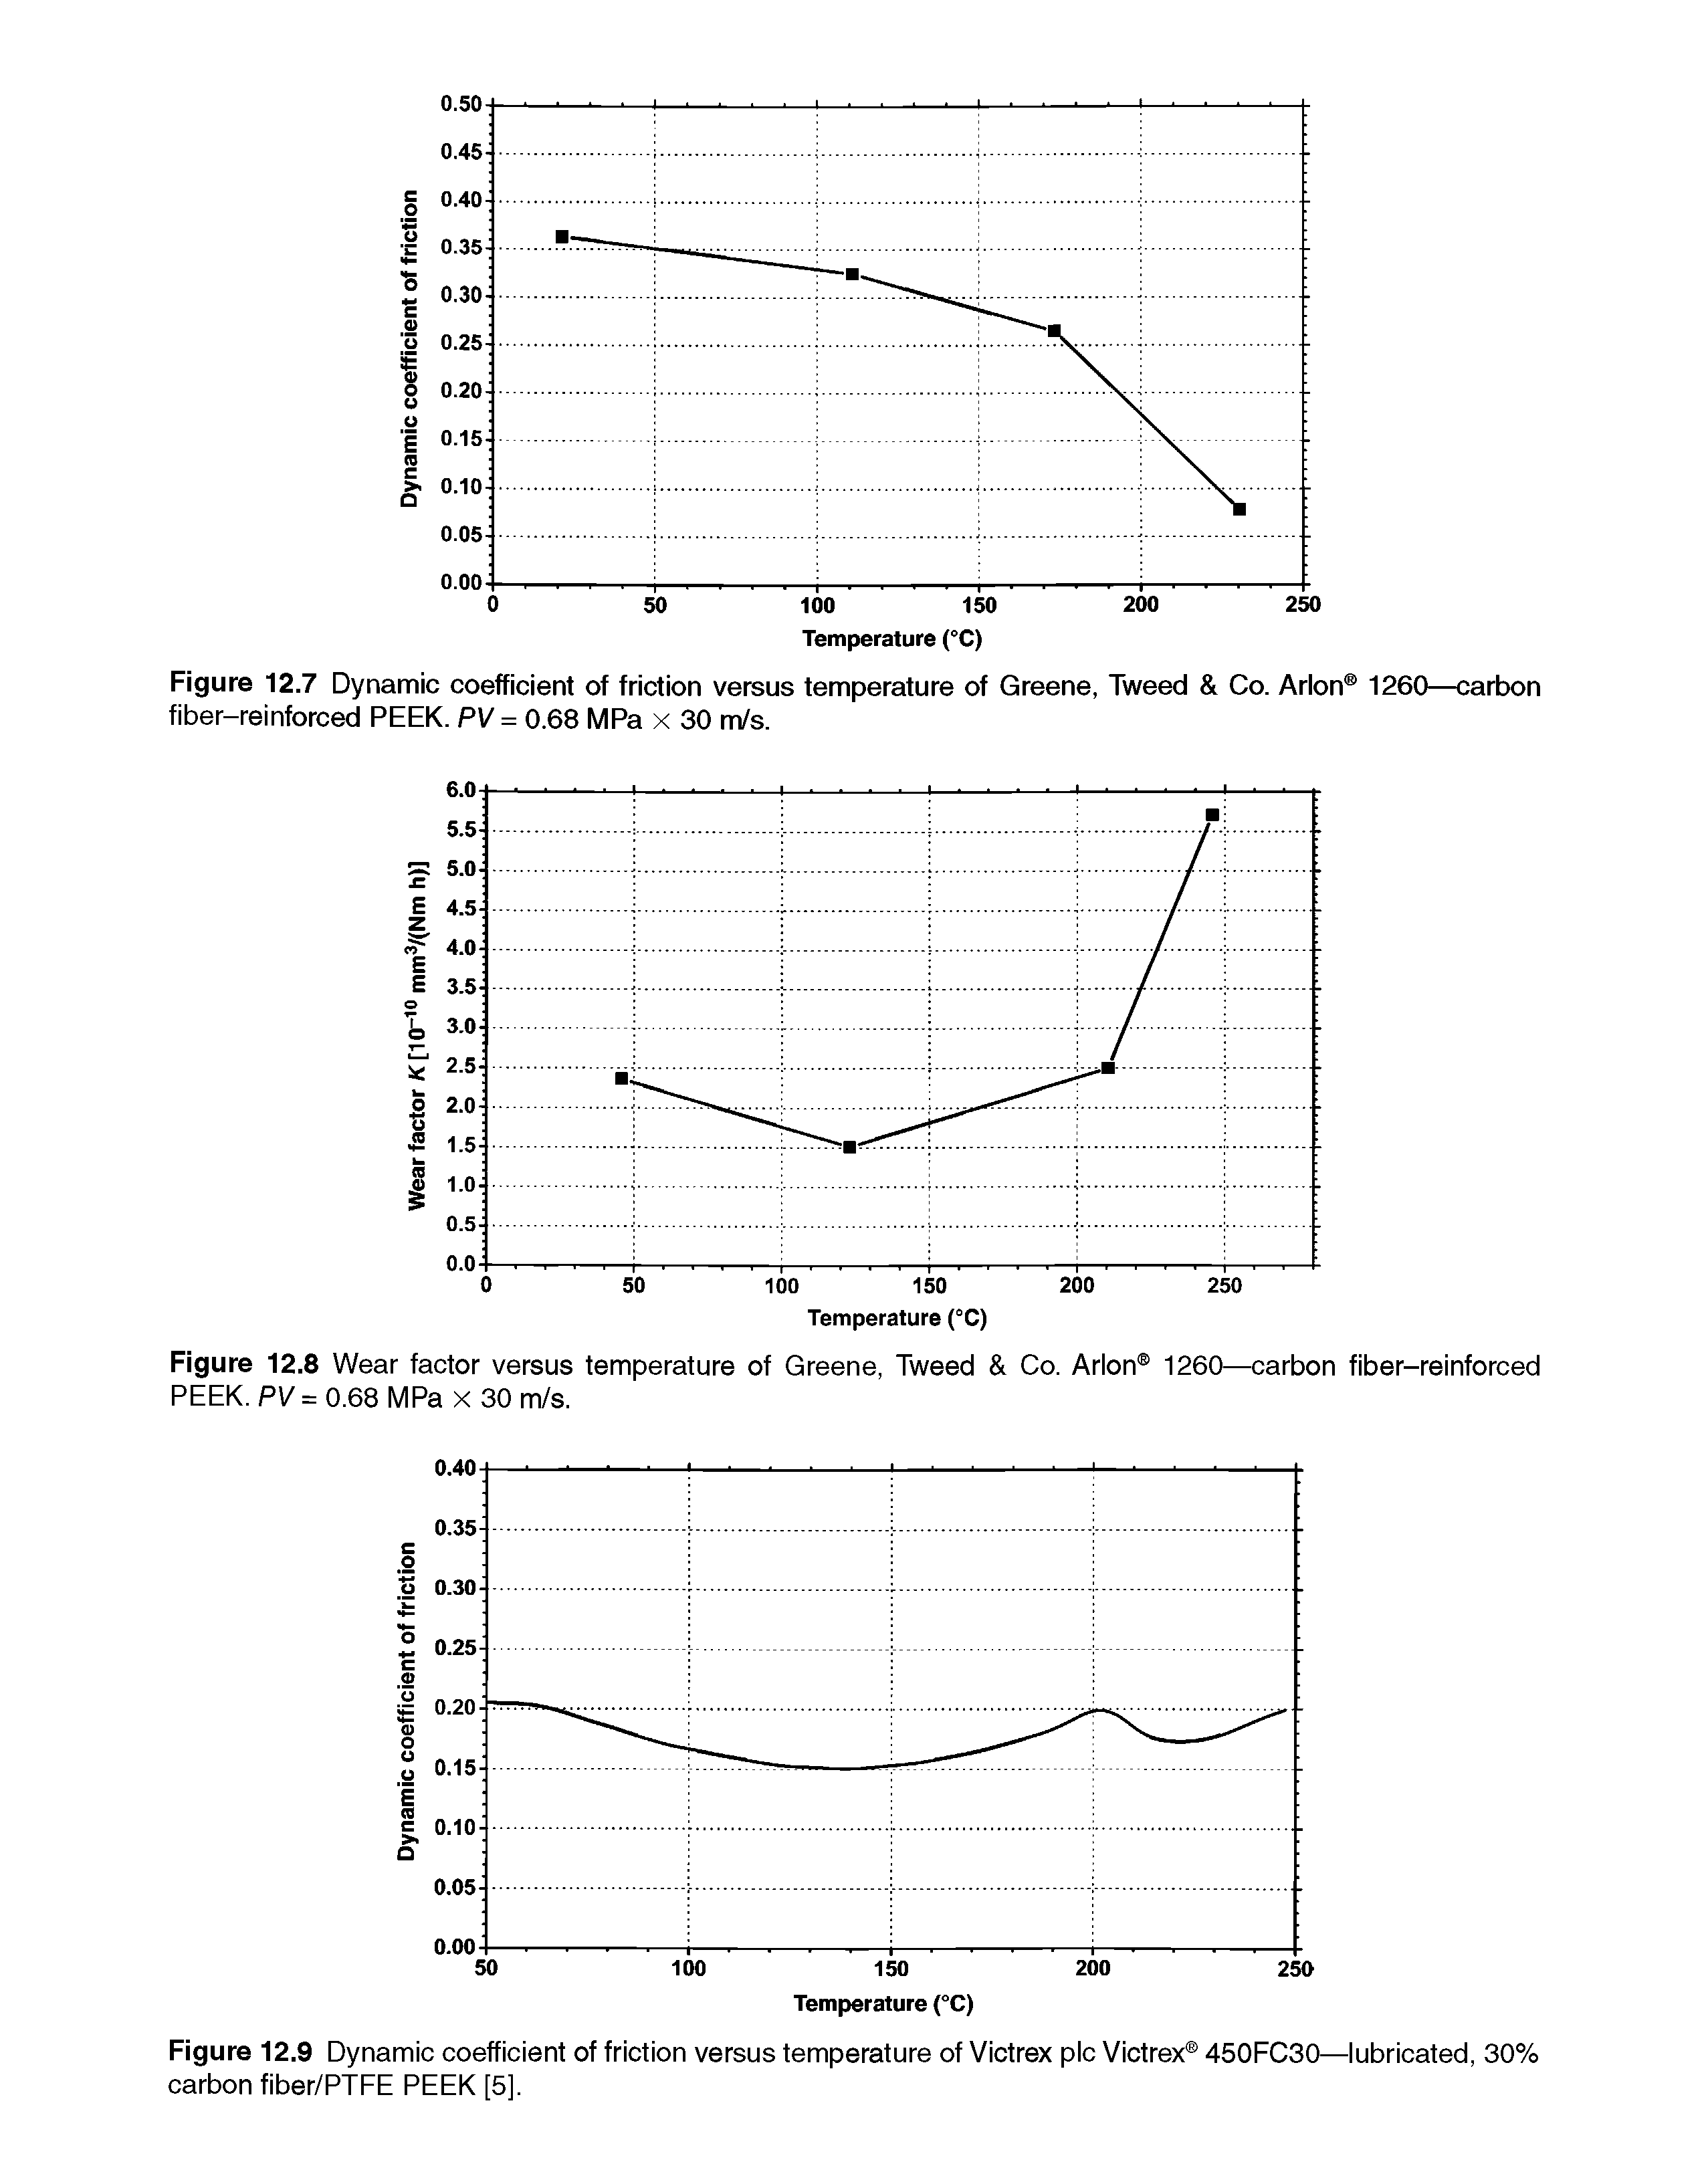 Figure 12.9 Dynamic coefficient of friction versus temperature of Victrex pic Victrex 450FC30—lubricated, 30% carbon fiber/PTFE PEEK [5].